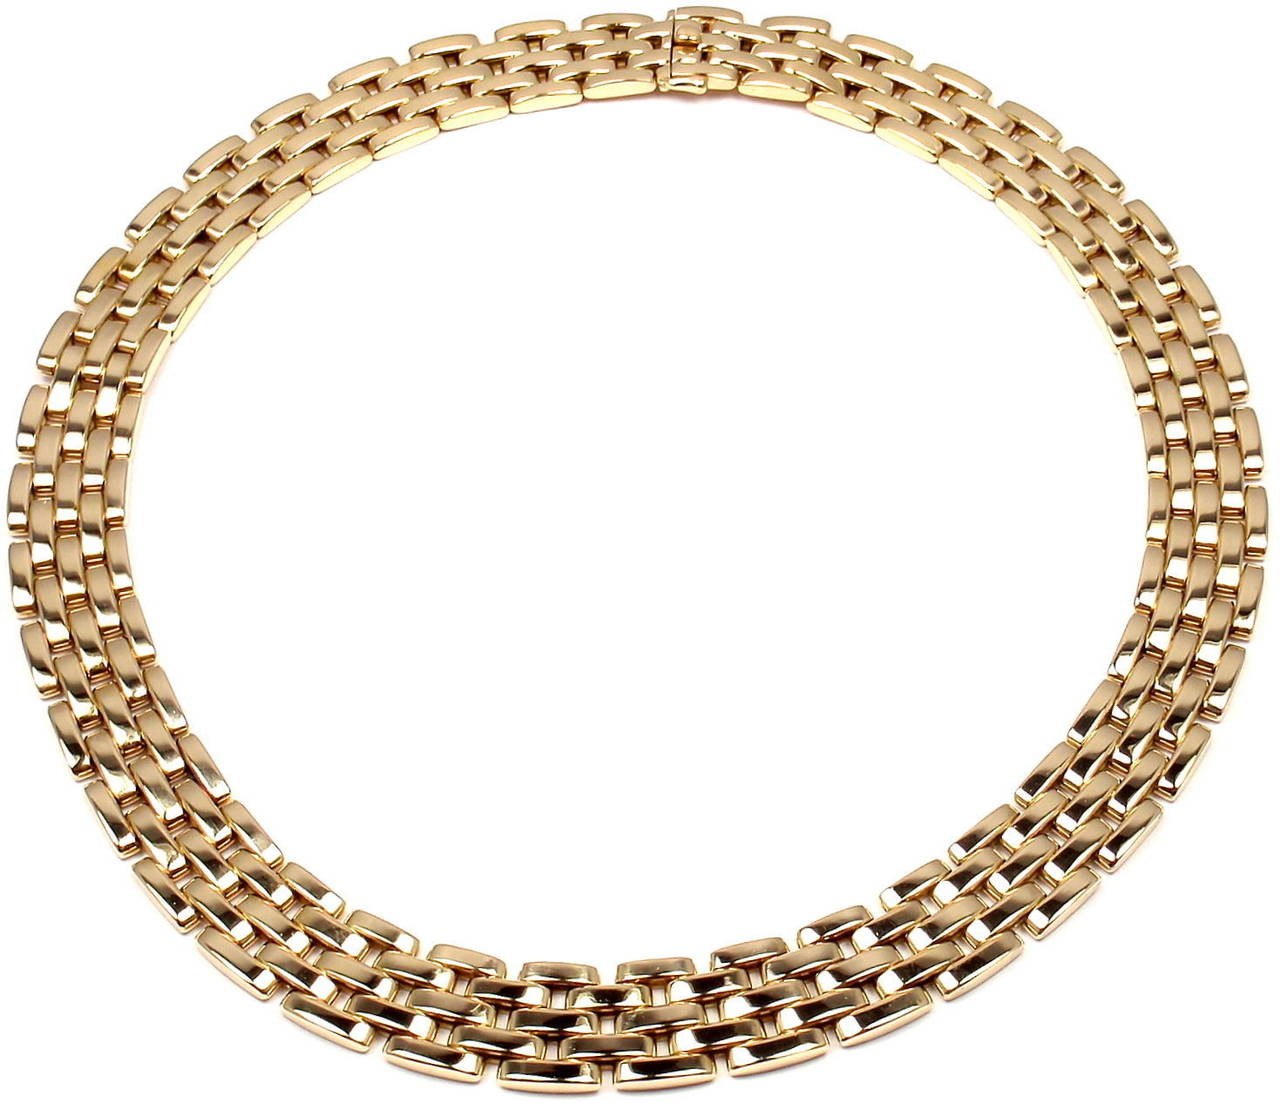 Cartier Maillon Panthere Five-Row Yellow Gold Necklace